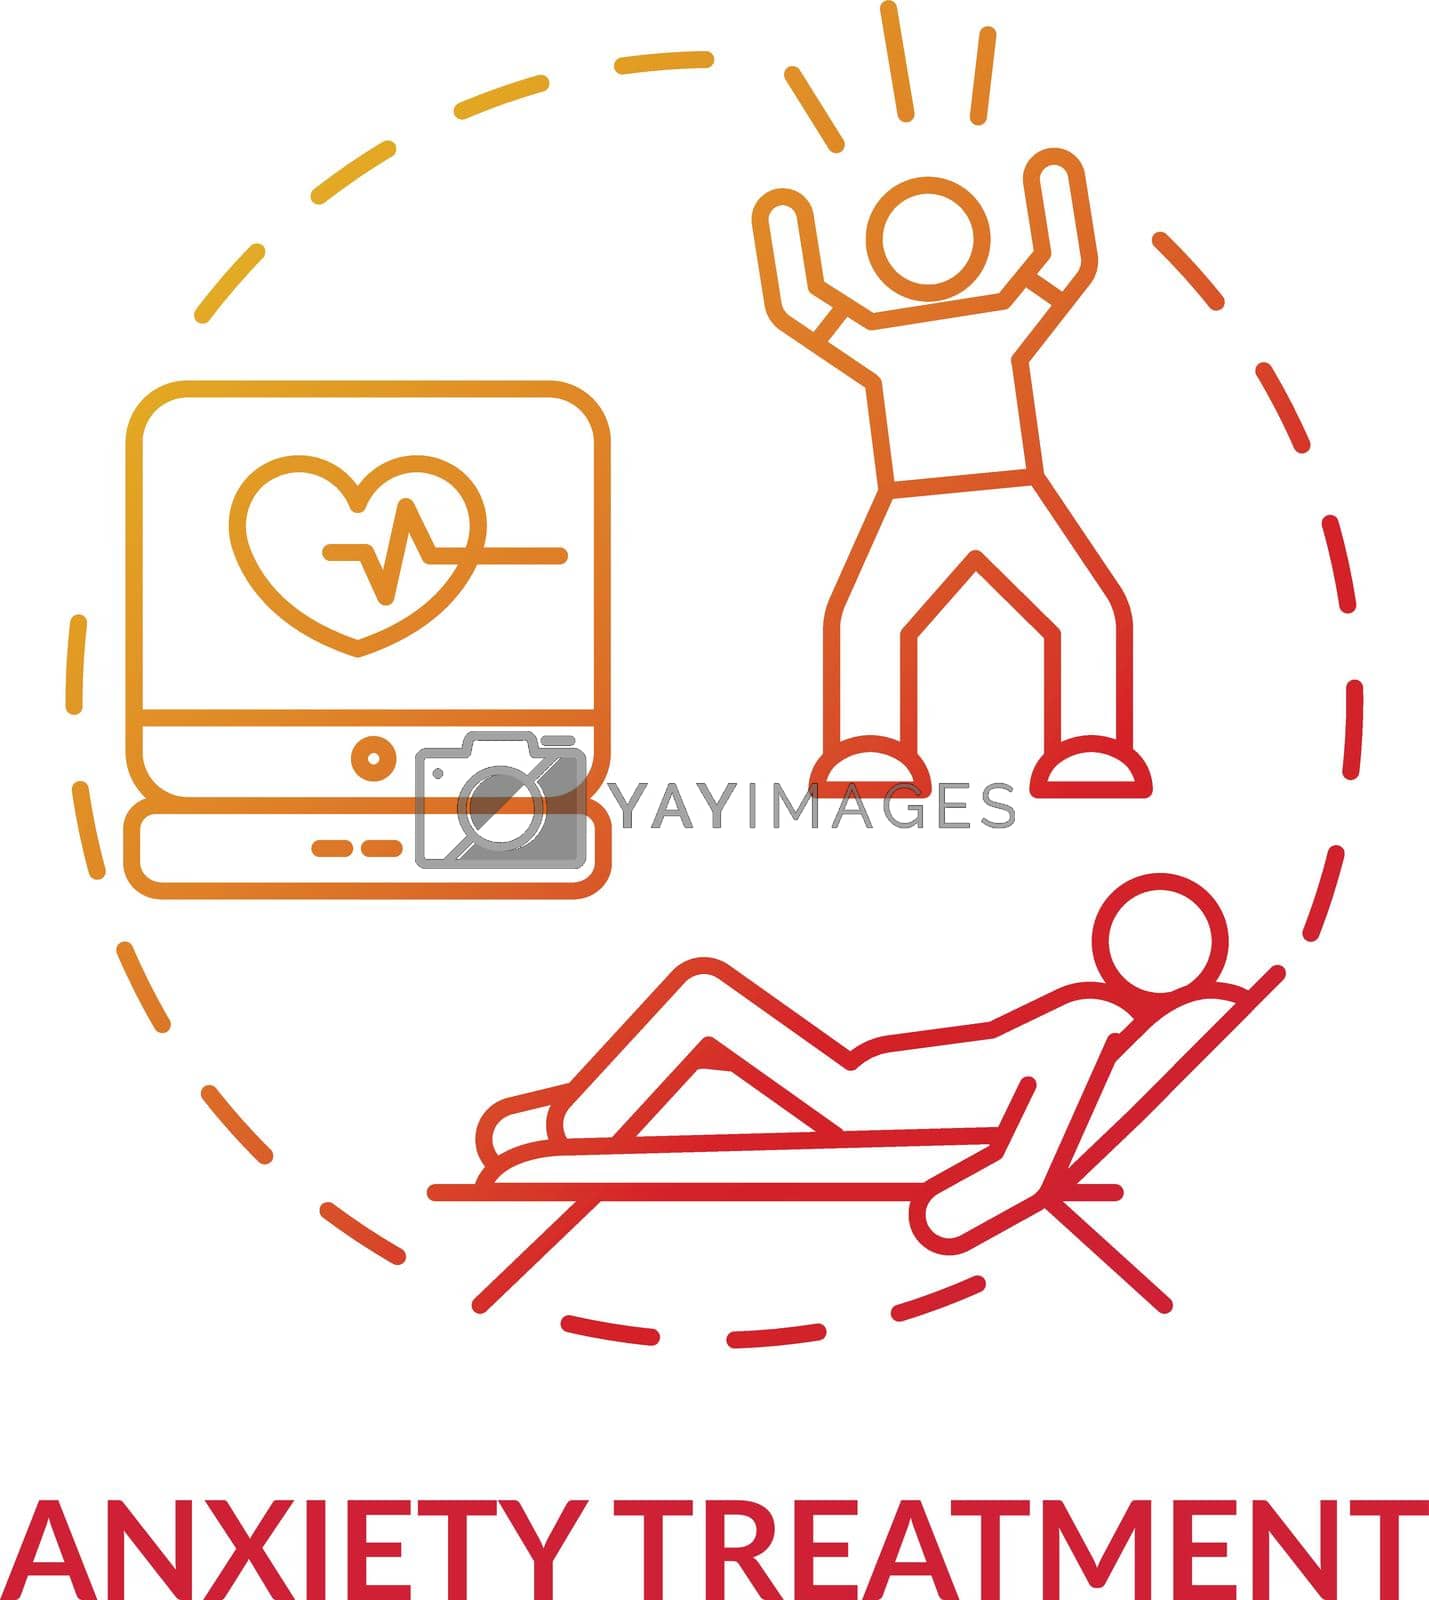 Royalty free image of Anxiety treatment concept icon by bsd